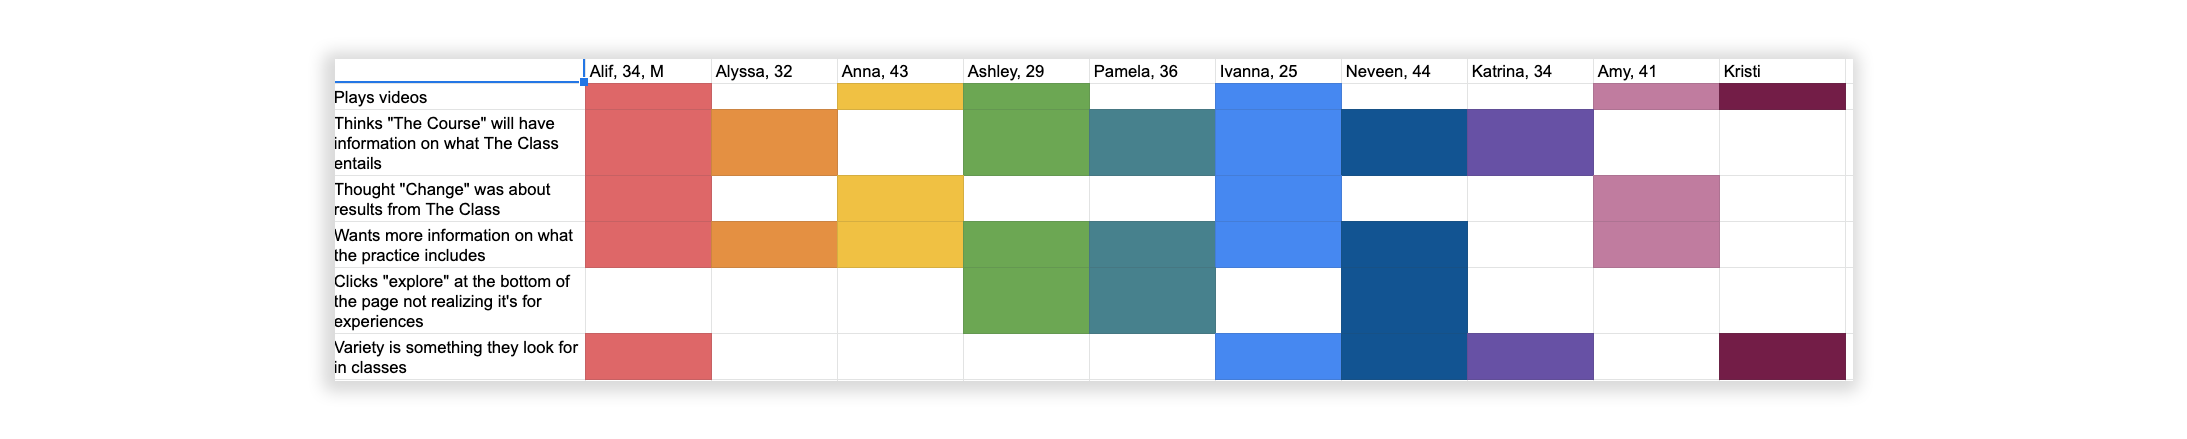 A color-coordinated spreadsheet showing names of participants and observations